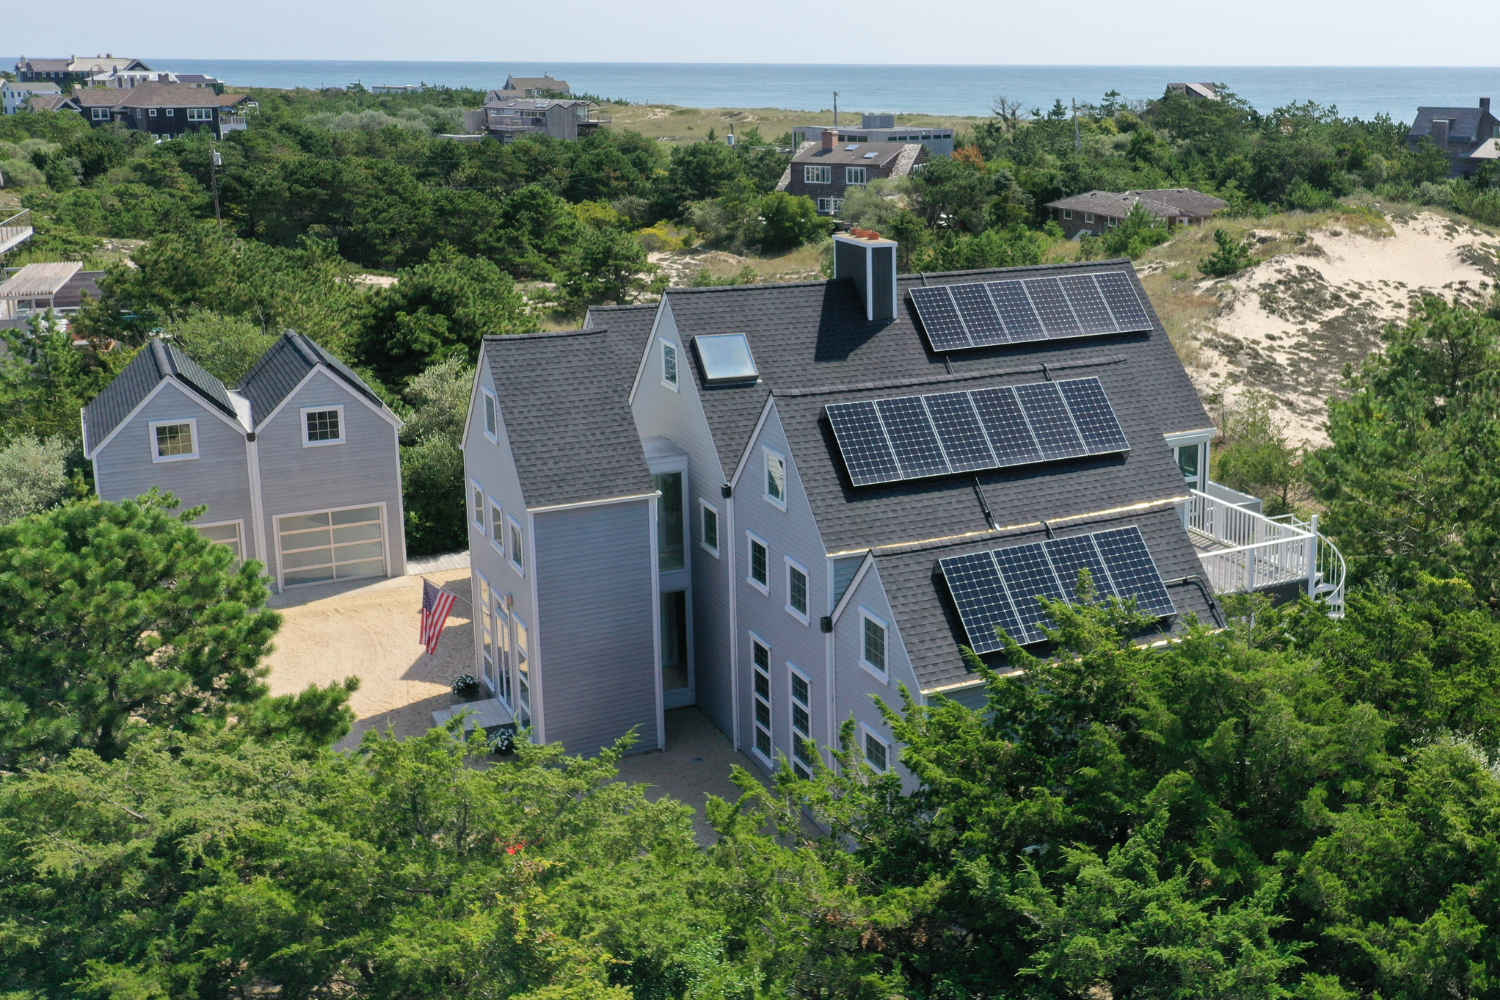 Solar panels on the tiered roof of a house near the ocean on Long Island. The Federal Solar Tax Credit allows homeowners to save money on their taxes when they install solar panels on their home. The Federal Solar Tax Credit allows homeowners to save money on their taxes when they install solar panels on their home.